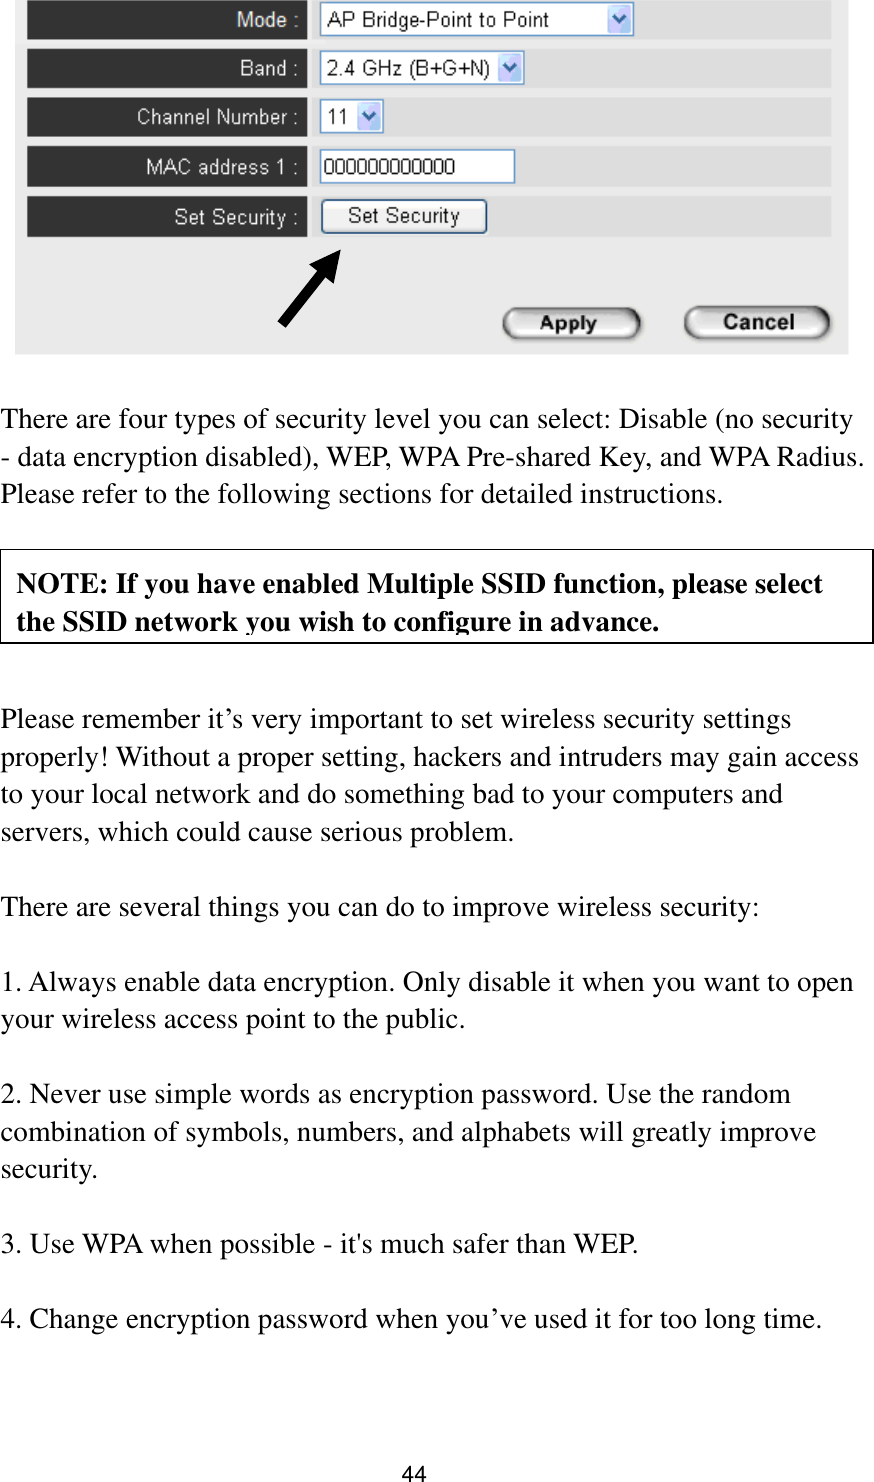 44     There are four types of security level you can select: Disable (no security - data encryption disabled), WEP, WPA Pre-shared Key, and WPA Radius. Please refer to the following sections for detailed instructions.      Please remember it‟s very important to set wireless security settings properly! Without a proper setting, hackers and intruders may gain access to your local network and do something bad to your computers and servers, which could cause serious problem.    There are several things you can do to improve wireless security:  1. Always enable data encryption. Only disable it when you want to open your wireless access point to the public.  2. Never use simple words as encryption password. Use the random combination of symbols, numbers, and alphabets will greatly improve security.  3. Use WPA when possible - it&apos;s much safer than WEP.  4. Change encryption password when you‟ve used it for too long time. NOTE: If you have enabled Multiple SSID function, please select the SSID network you wish to configure in advance. 